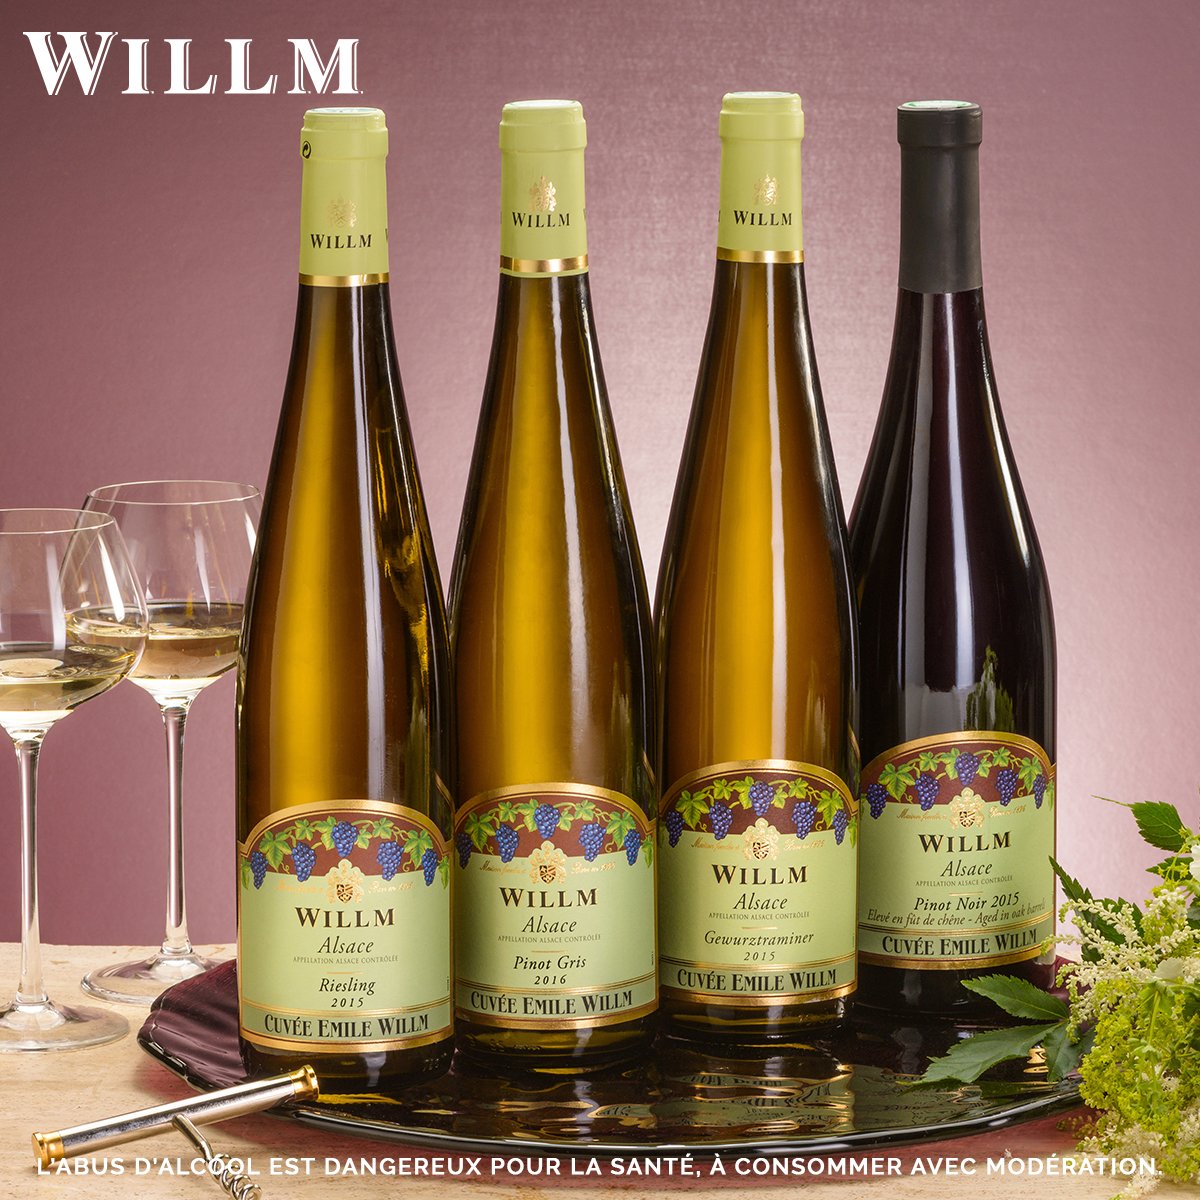 Our Cuvée Emile Willm range pays homage to the son of Adolphe Willm who founded our Maison in 1896. All of these #wines are made from plot selections with precise characteristics. These are #ample and #complex wines.